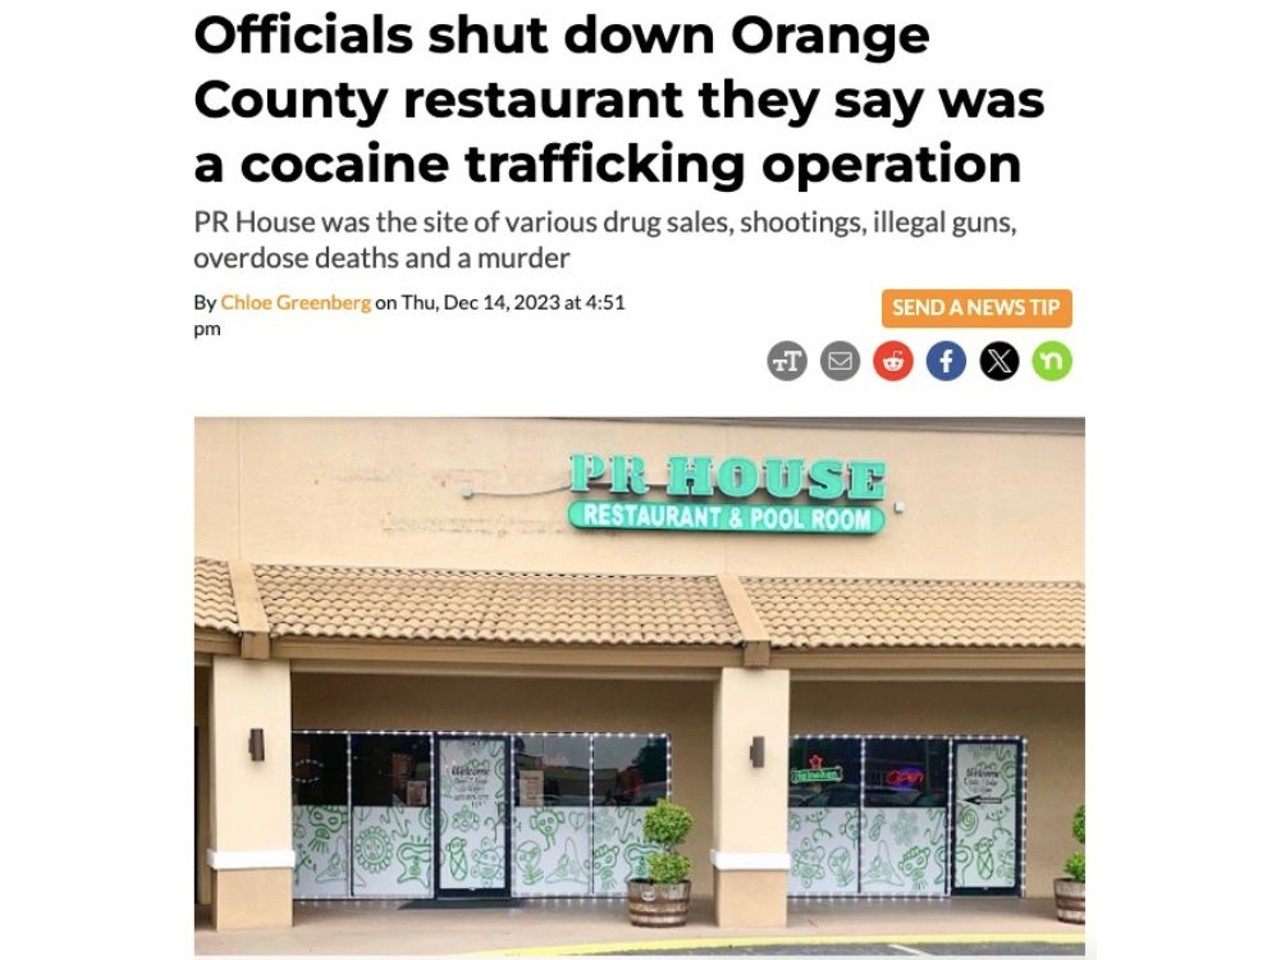 Punctuating a nearly 20-year-long investigation, officials arrested the PR House's owner and 17 others associated with the "criminal enterprise." Orange County Sheriff John Mina said the restaurant was also the site of drug sales, shootings, illegal guns, several overdose deaths and a murder. Read full article